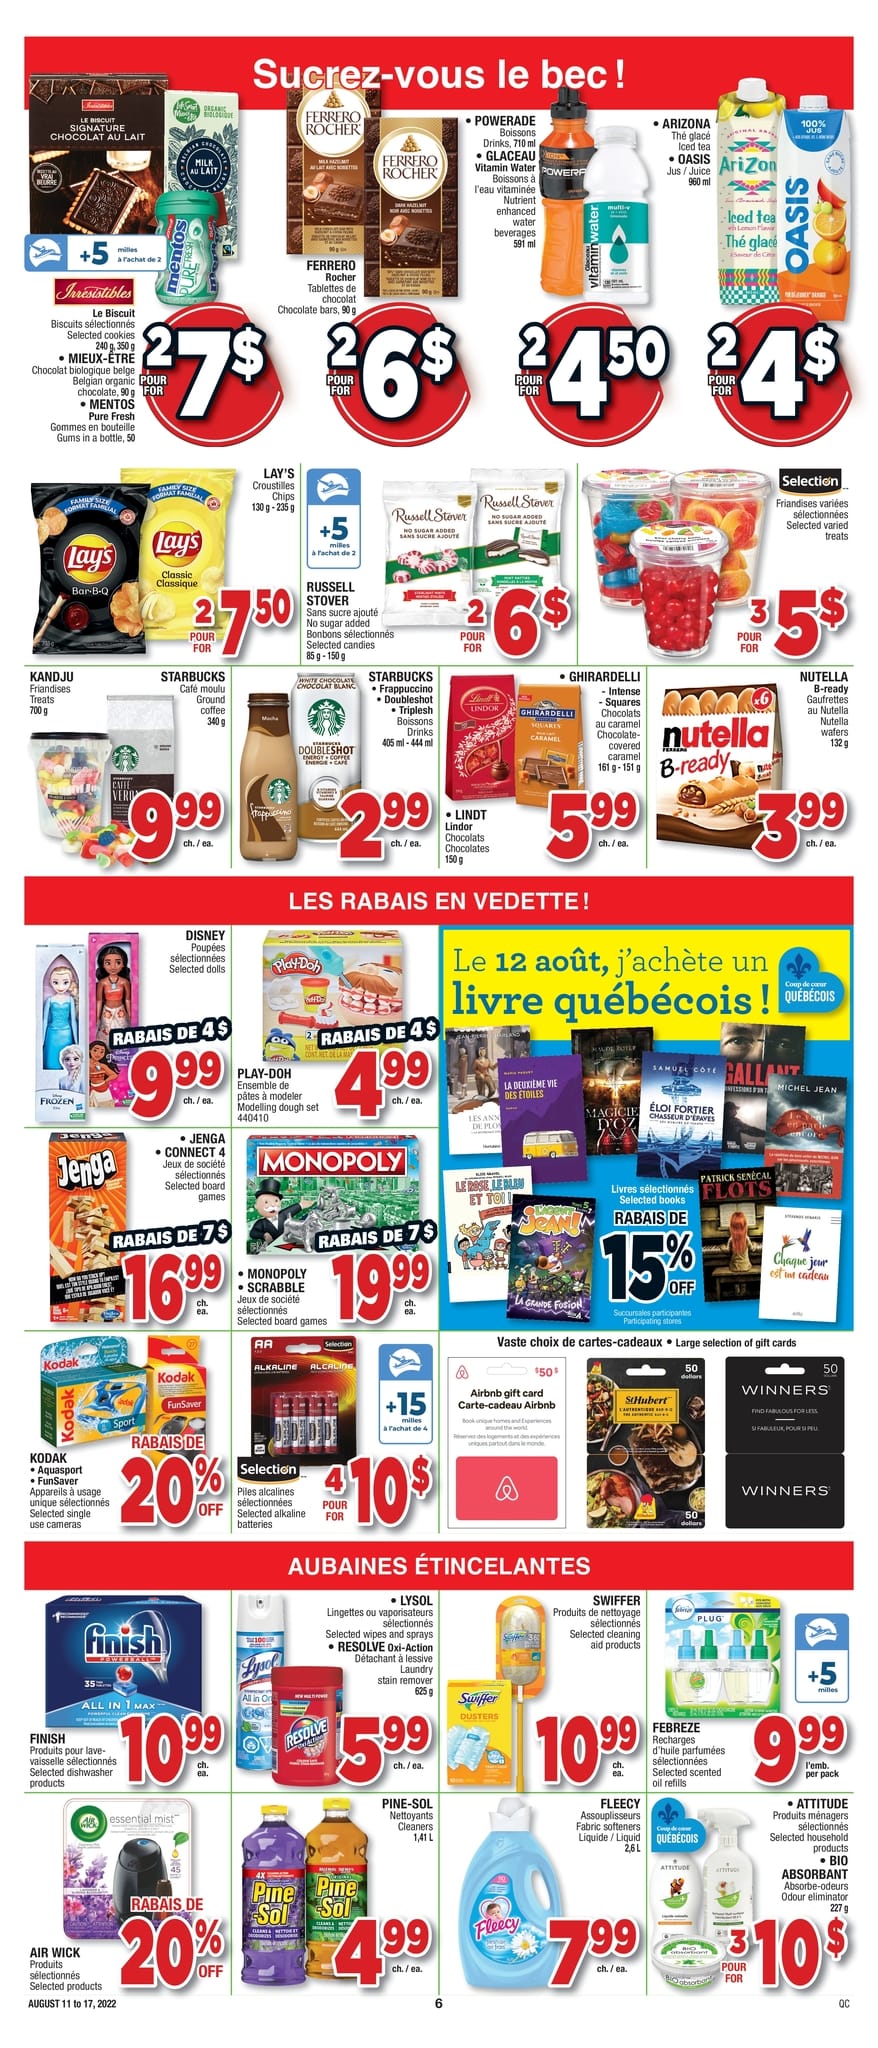 Circulaire Jean Coutu - Page 6